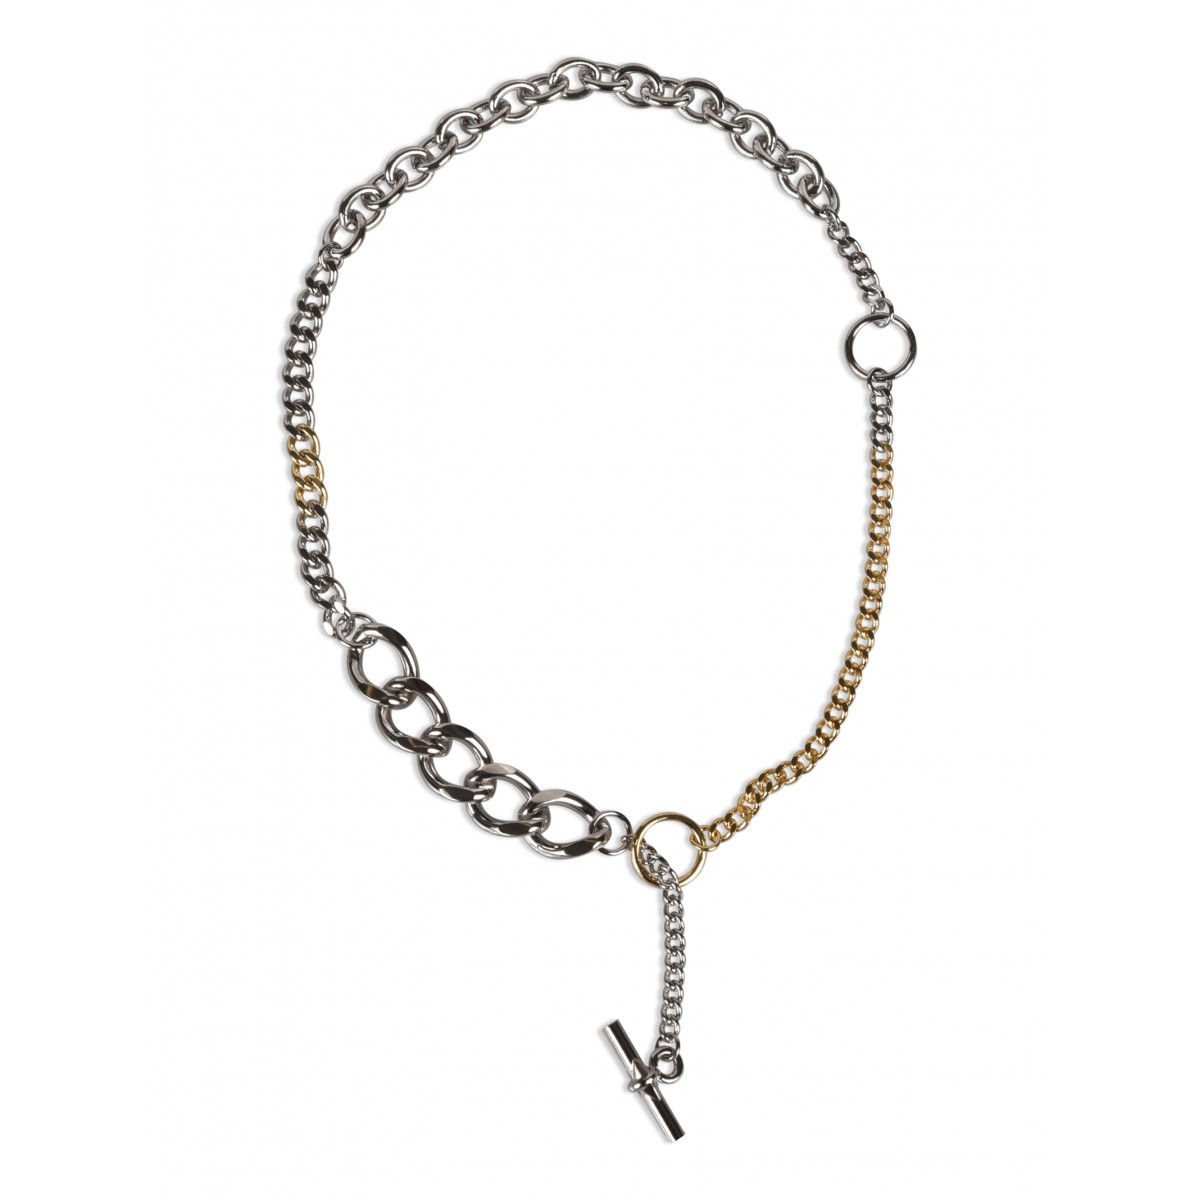 Silver and Golden-tone Chain Necklace